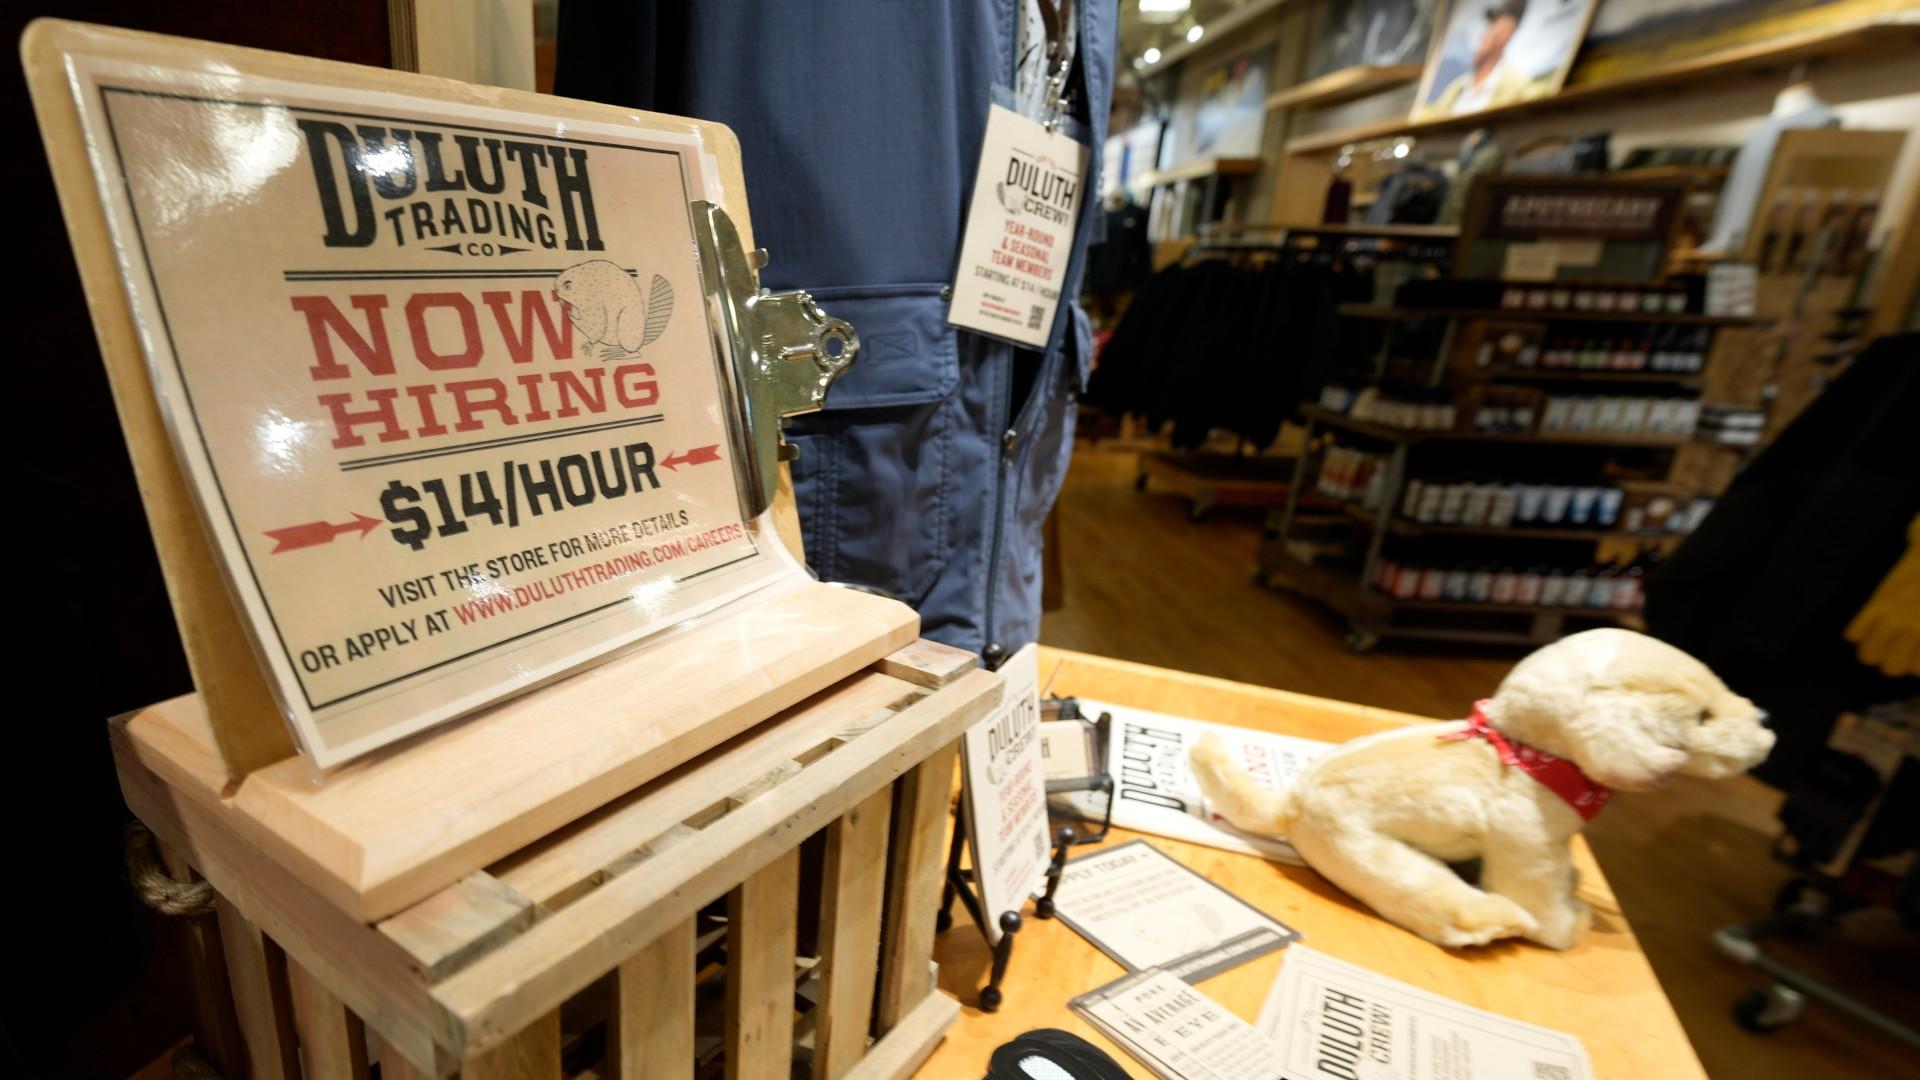 A now hiring sign sits on a display in a clothing store Saturday, Oct. 9, 2021, in Sioux Falls, S.D. (AP Photo /vDavid Zalubowski)